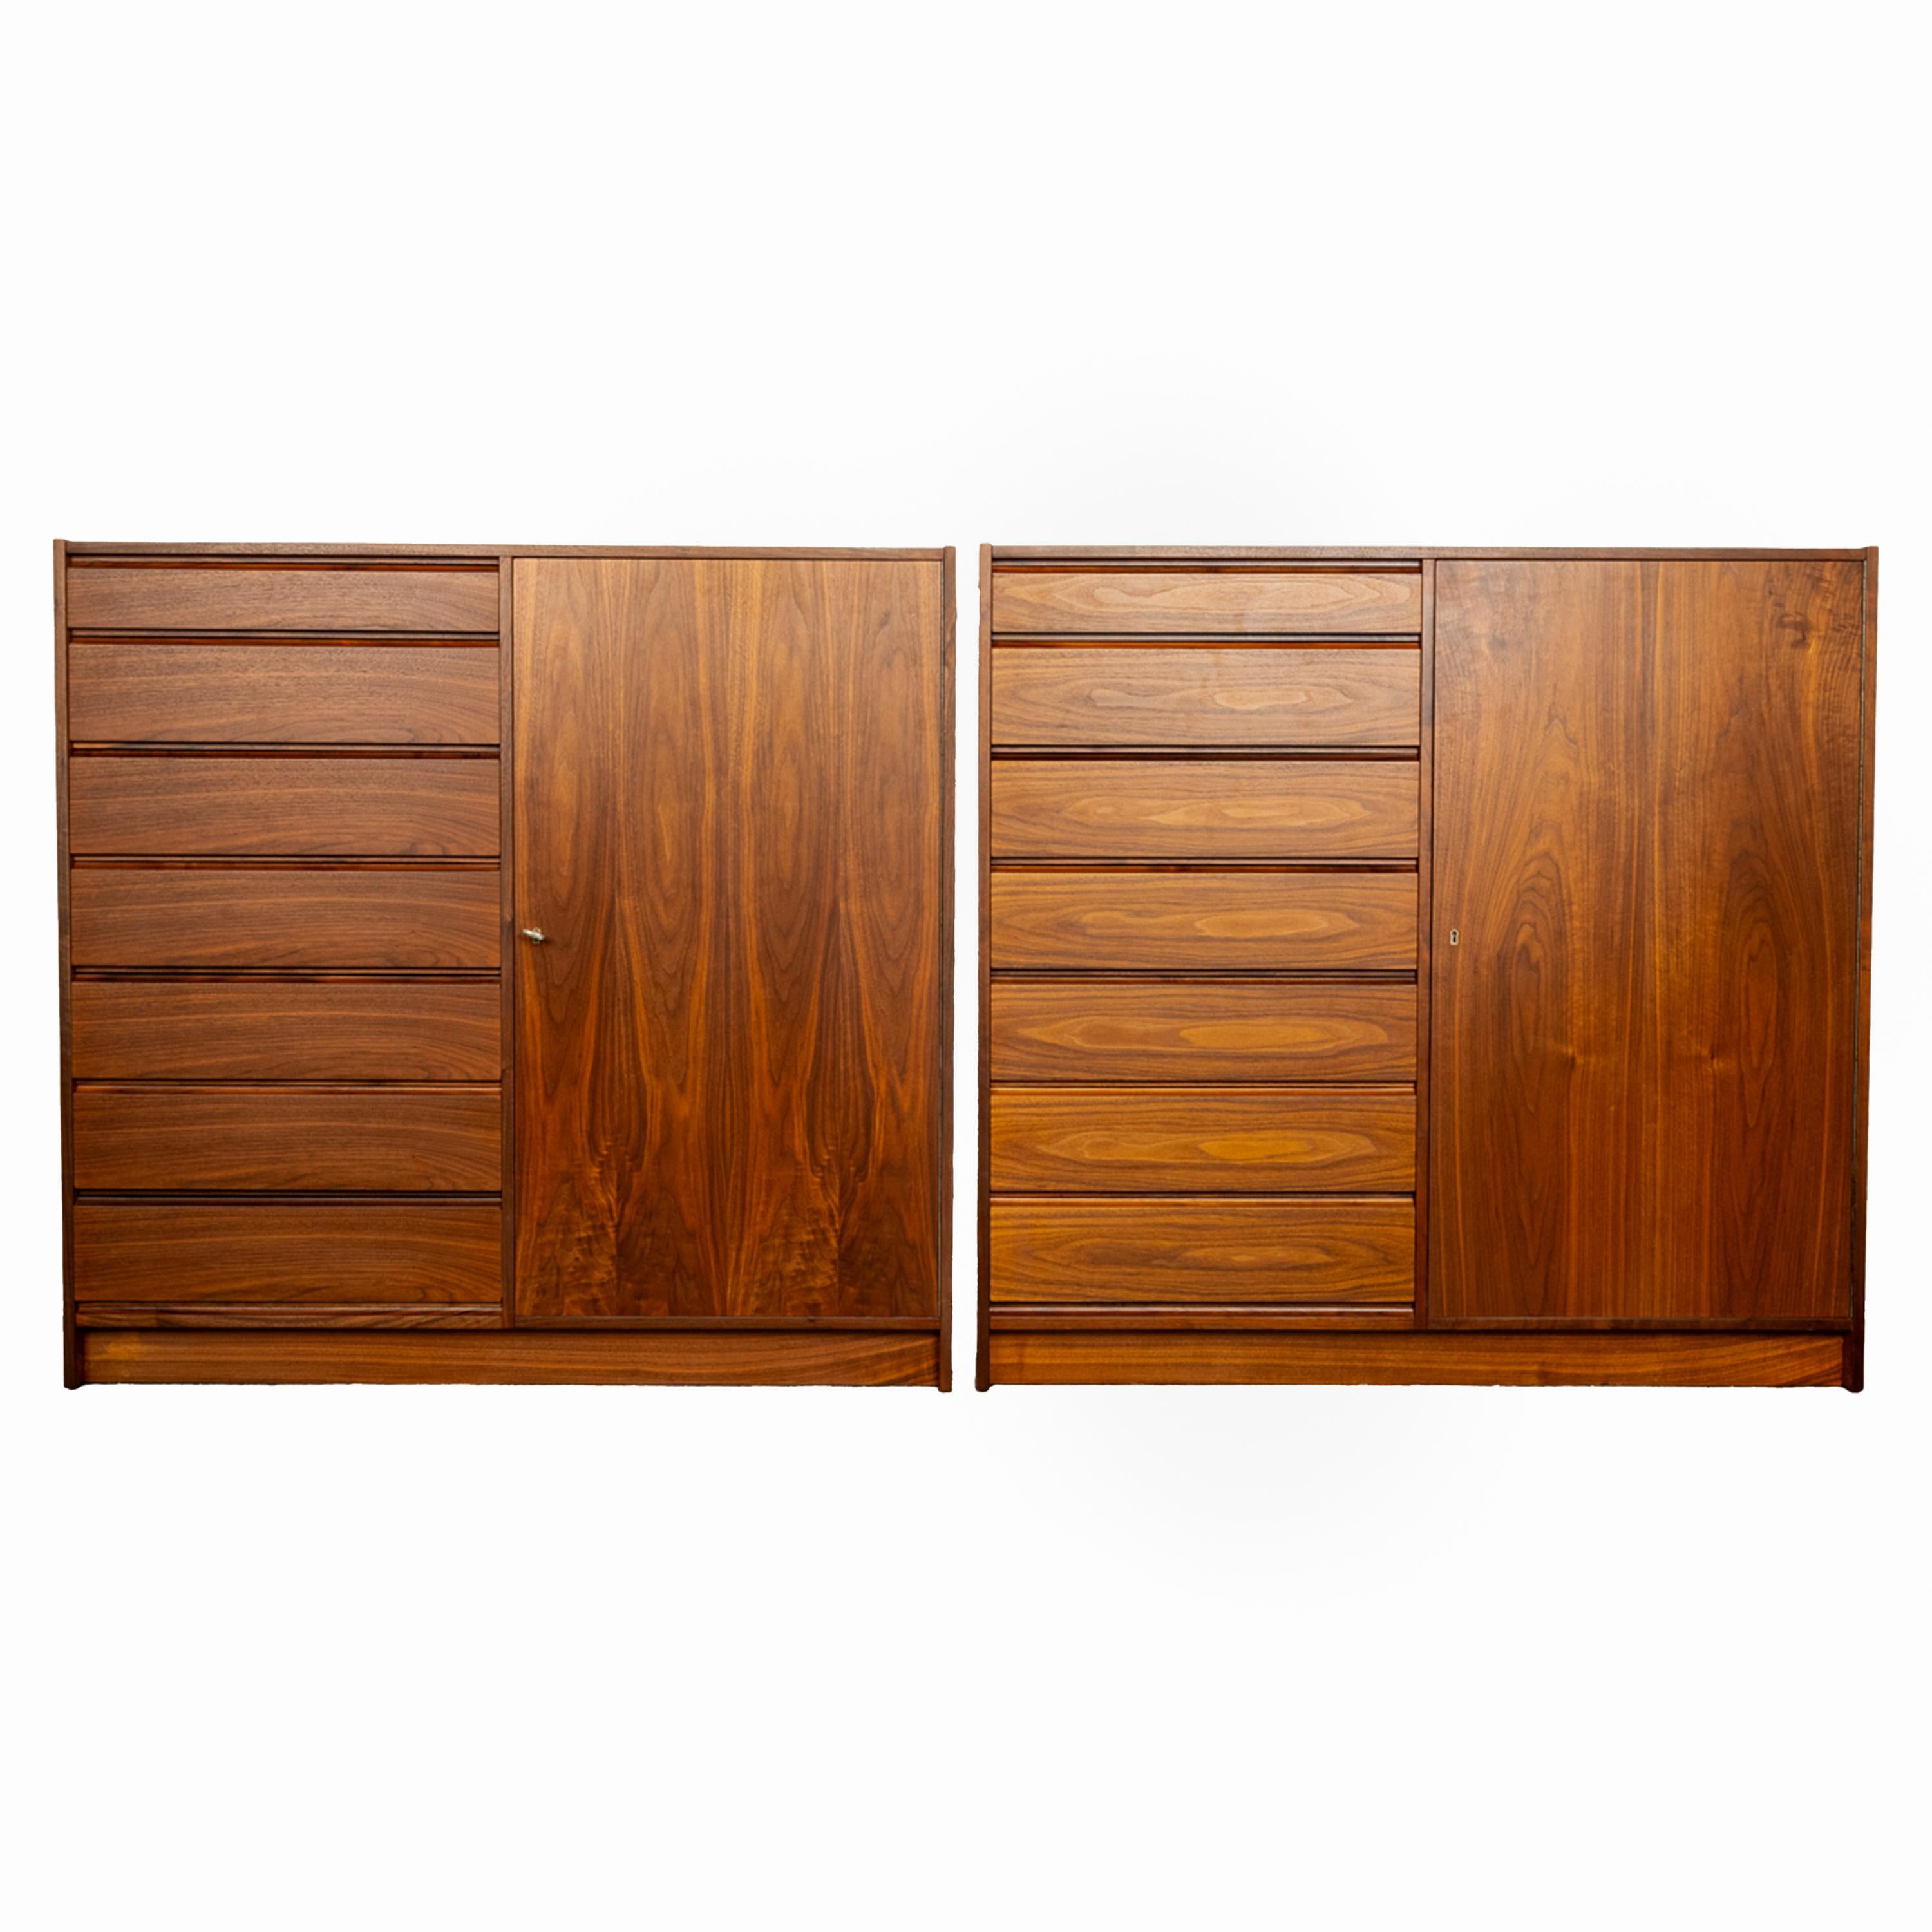 An excellent pair of Mid Century Modern teak chests, dressers, Danish, Svend Madsen for Sigurd Hansen Mobelfabrik, 1960s.
Both chests are in excellent condition and have just been professionally & sympathetically restored in Bloomsbury's workshops.